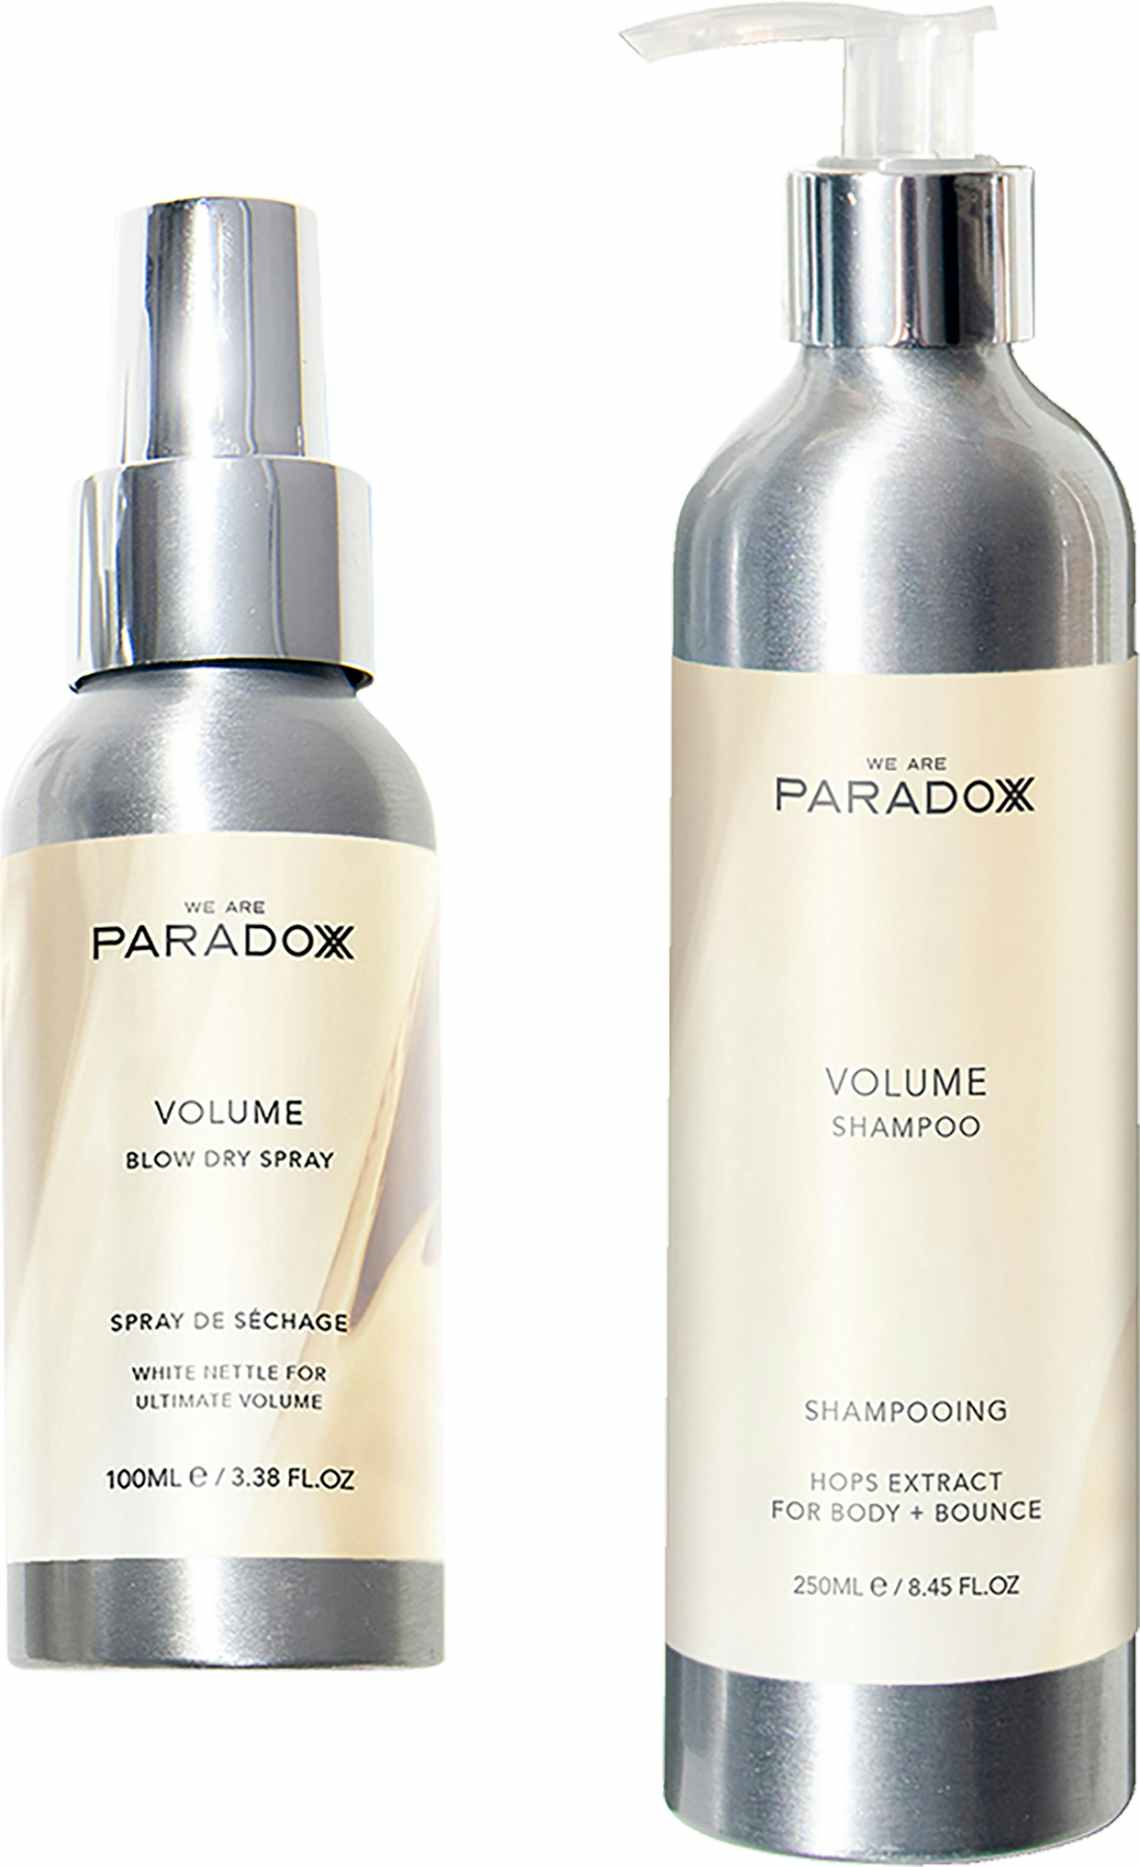 We Are Paradoxx hair products